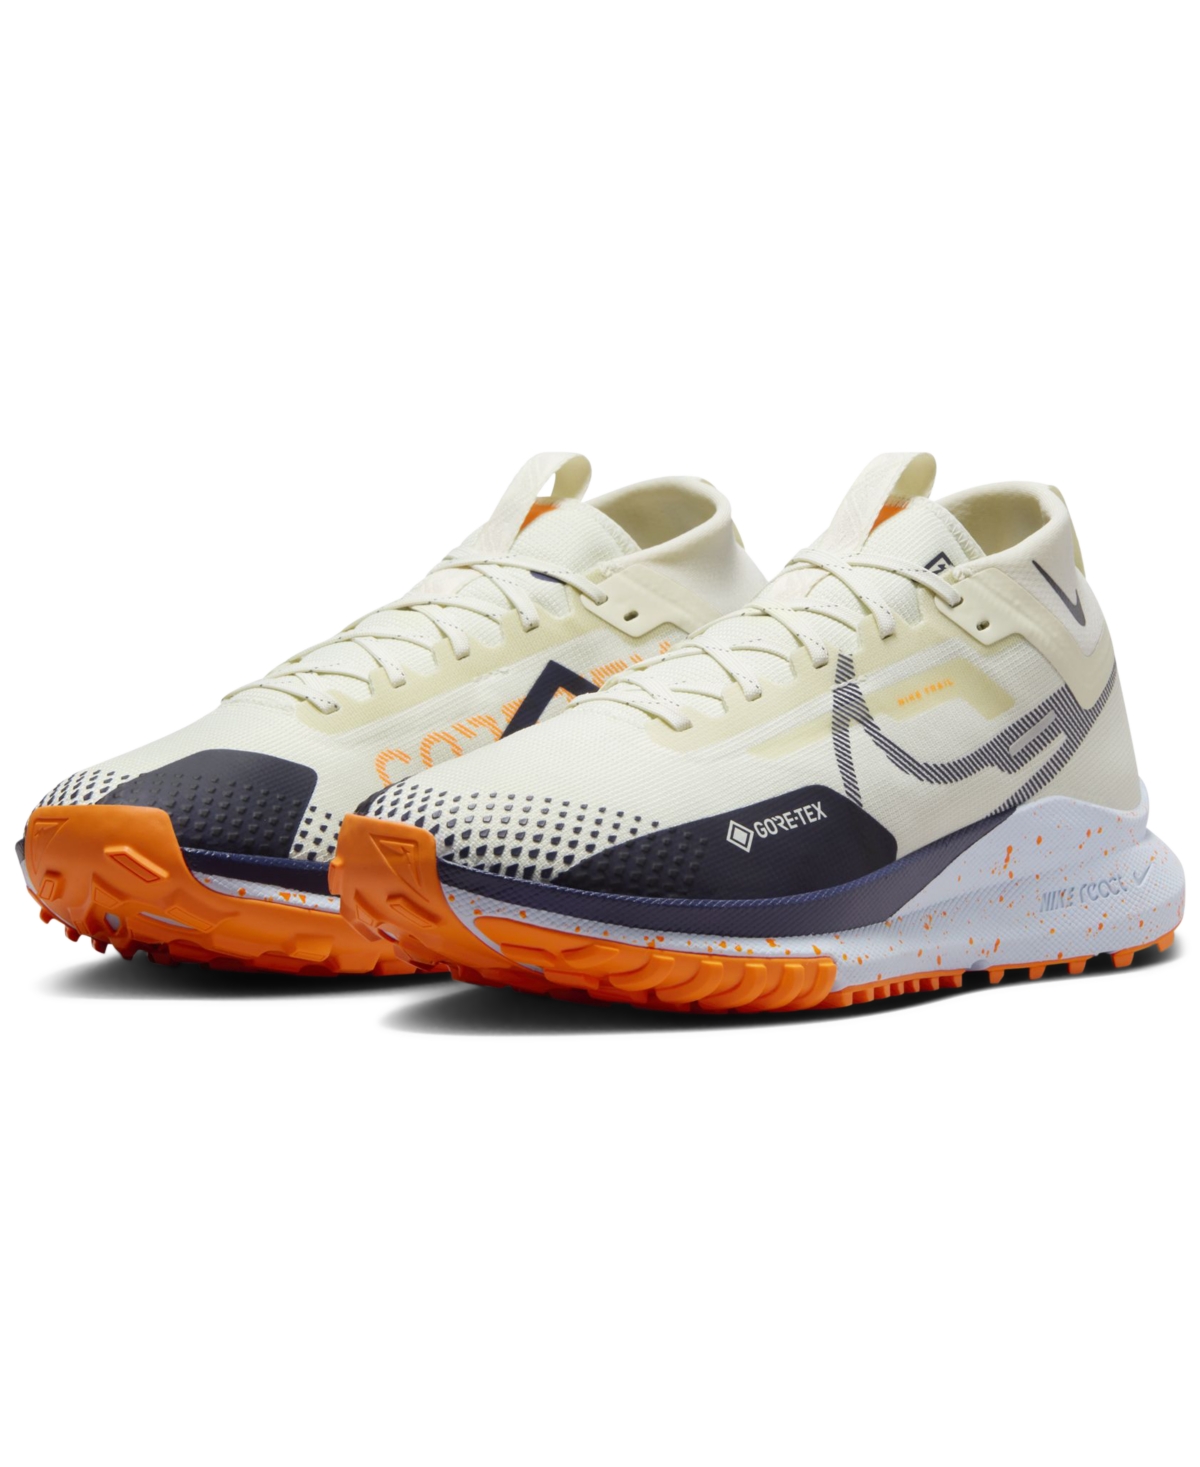 NIKE MEN'S REACT PEGASUS TRAIL 4 GORE-TEX WATER-RESISTANT TRAIL RUNNING SNEAKERS FROM FINISH LINE